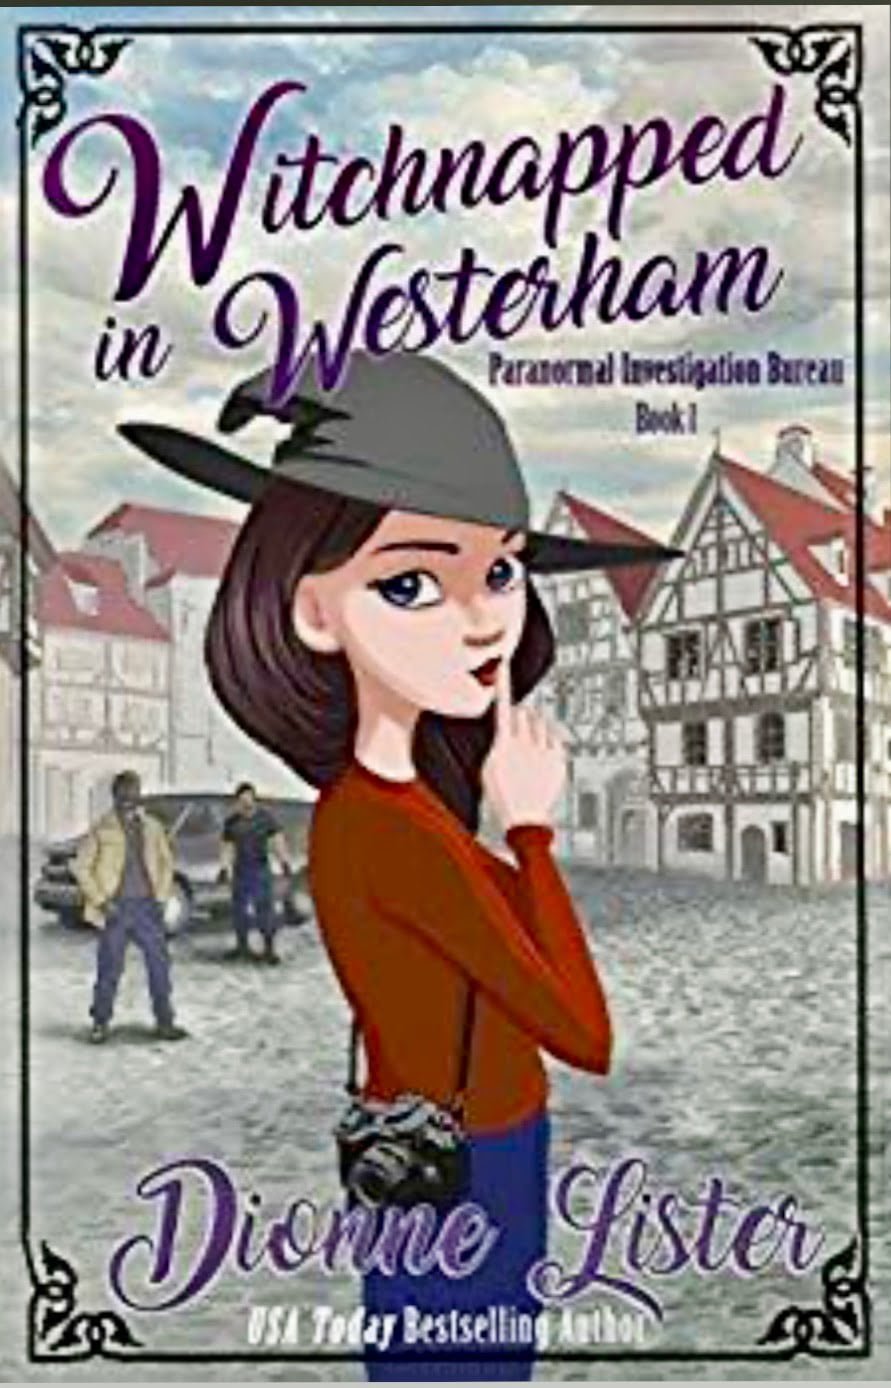 WITCHNAPPED IN WESTERHAM BY DIONNE LISTER – BOOK REVIEW